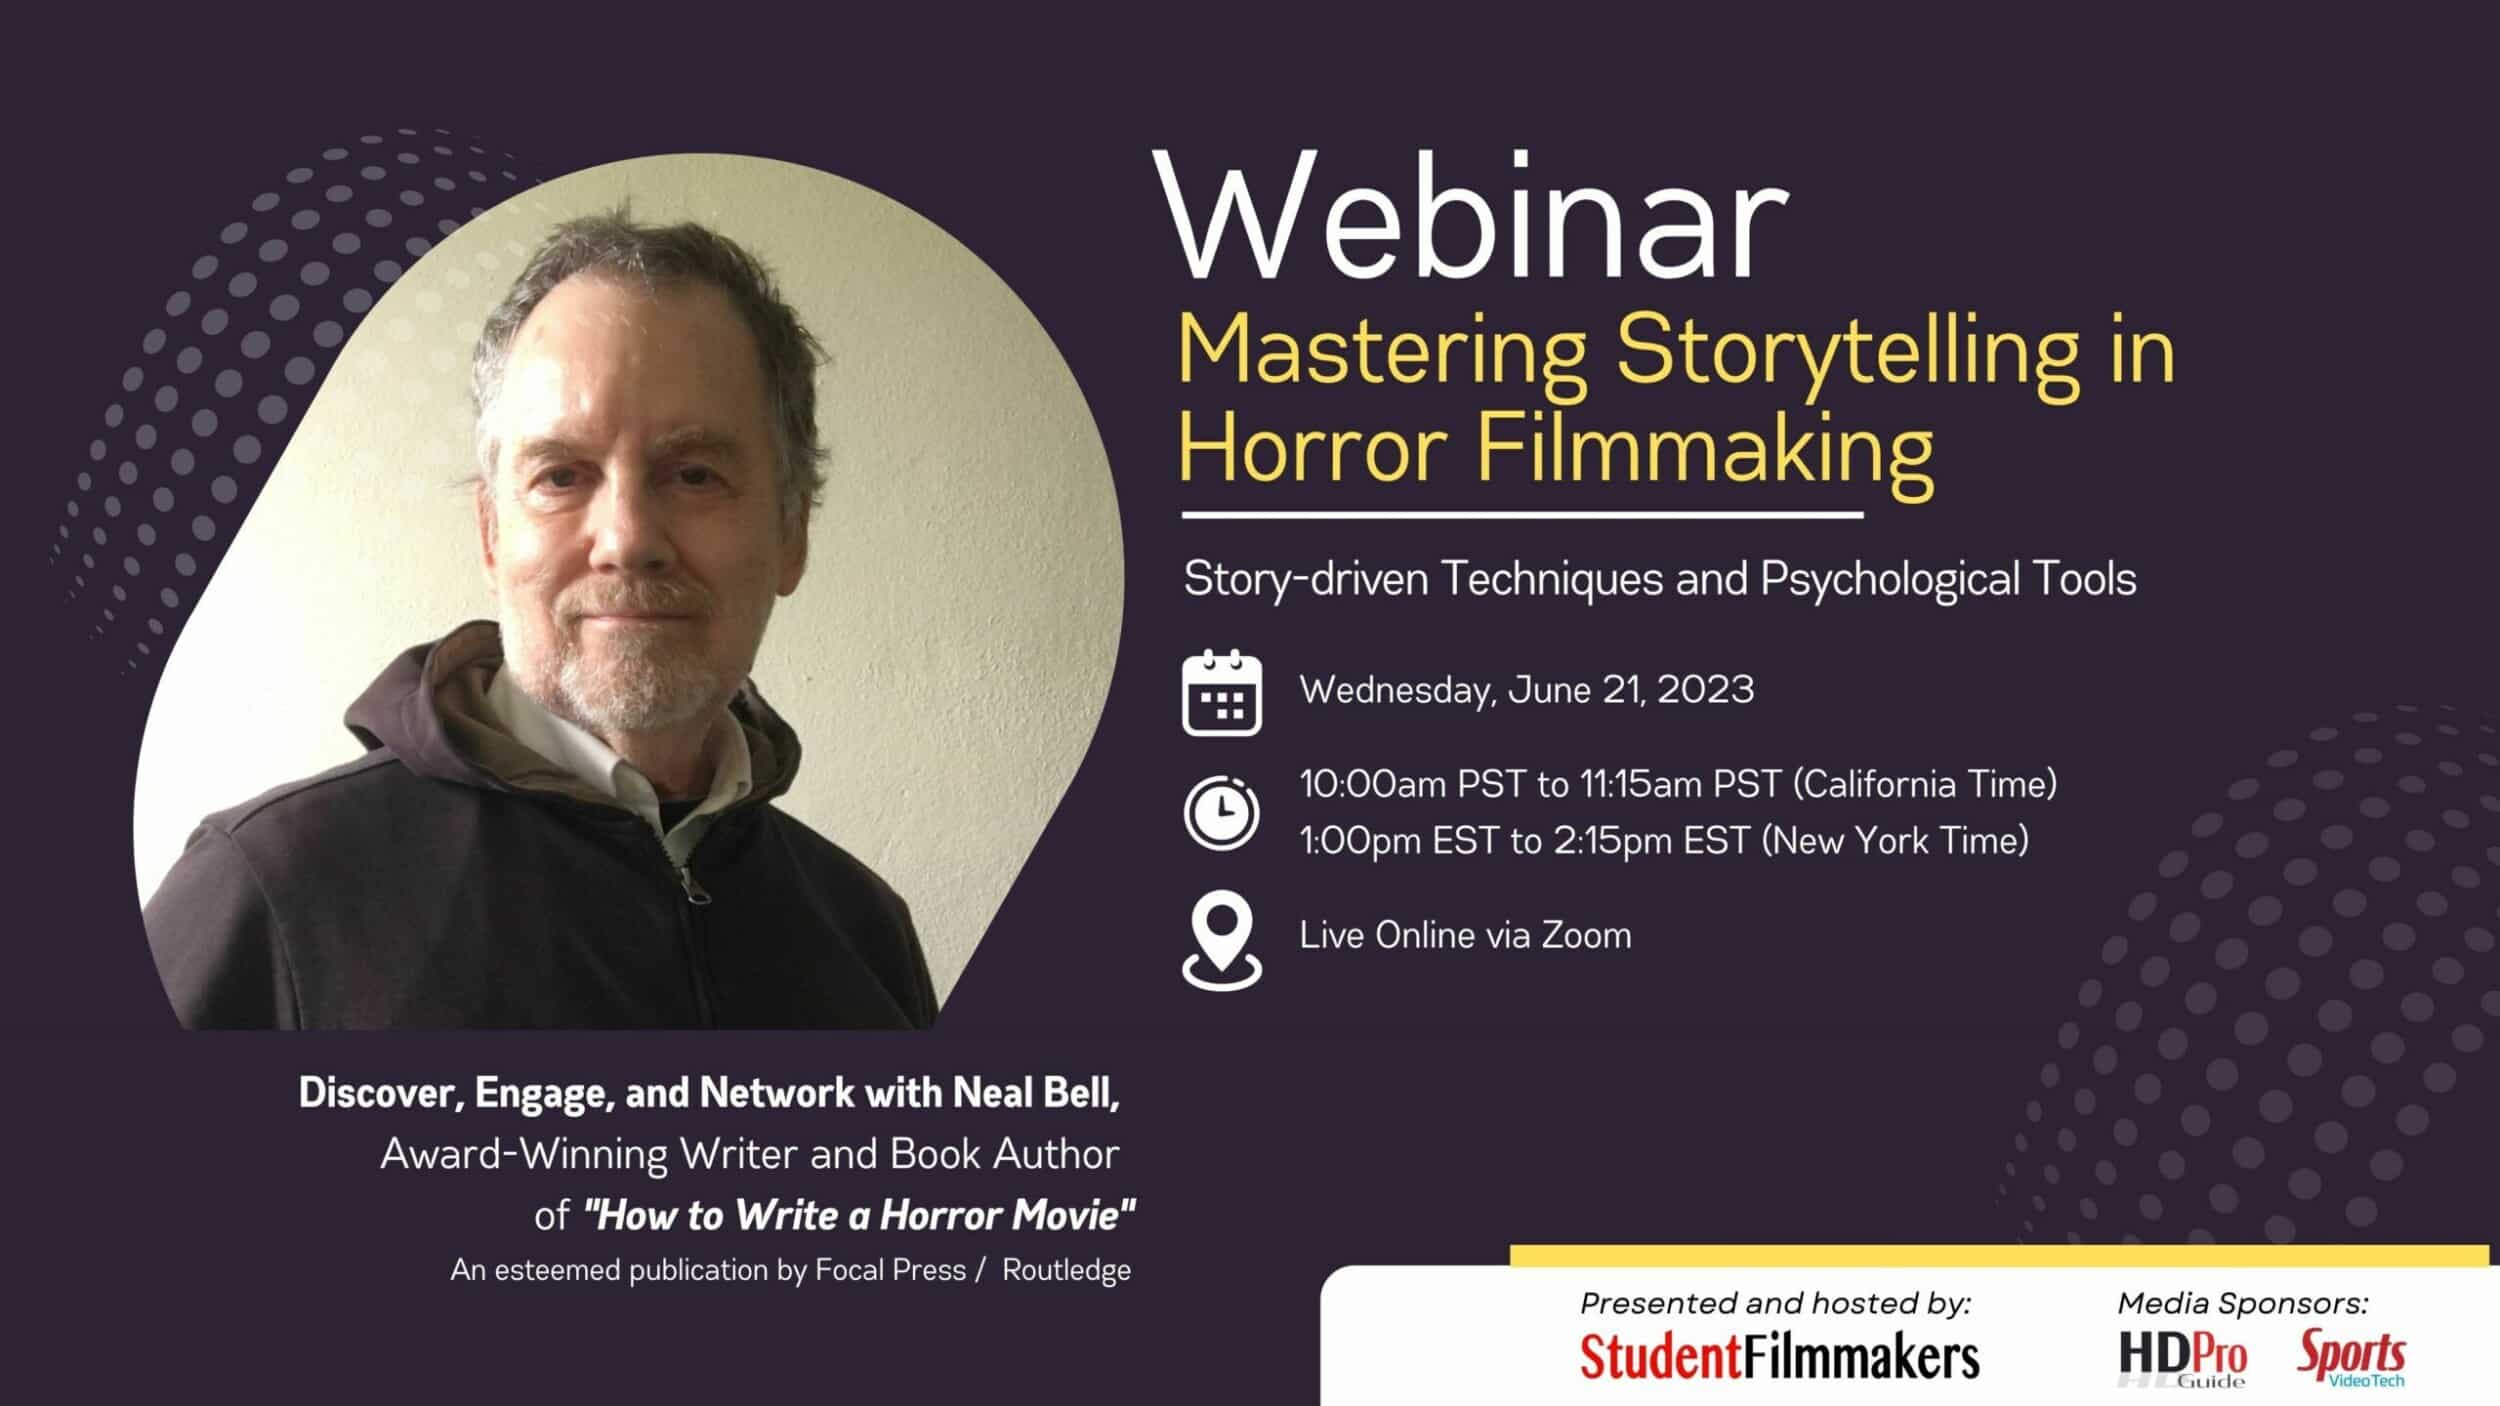 Mastering Storytelling in Horror Filmmaking with Award-Winning Writer Neal Bell: Story-driven Techniques and Psychological Tools